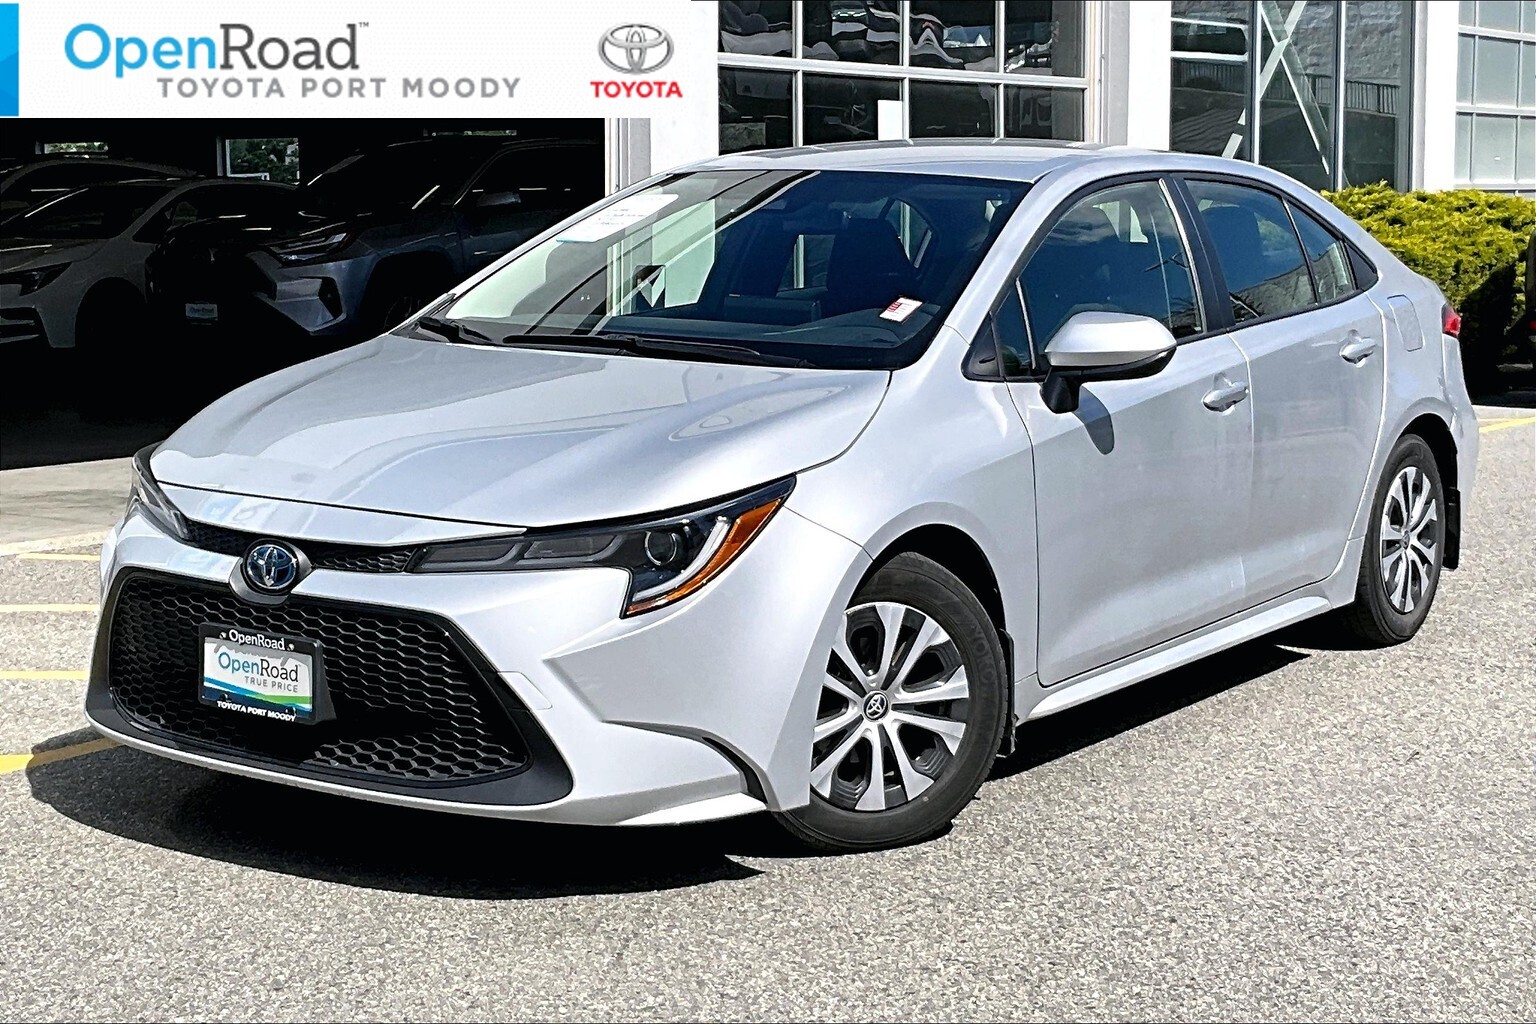 2022 Toyota Corolla Hybrid |OpenRoad True Price |Local |One Owner |Service Hi